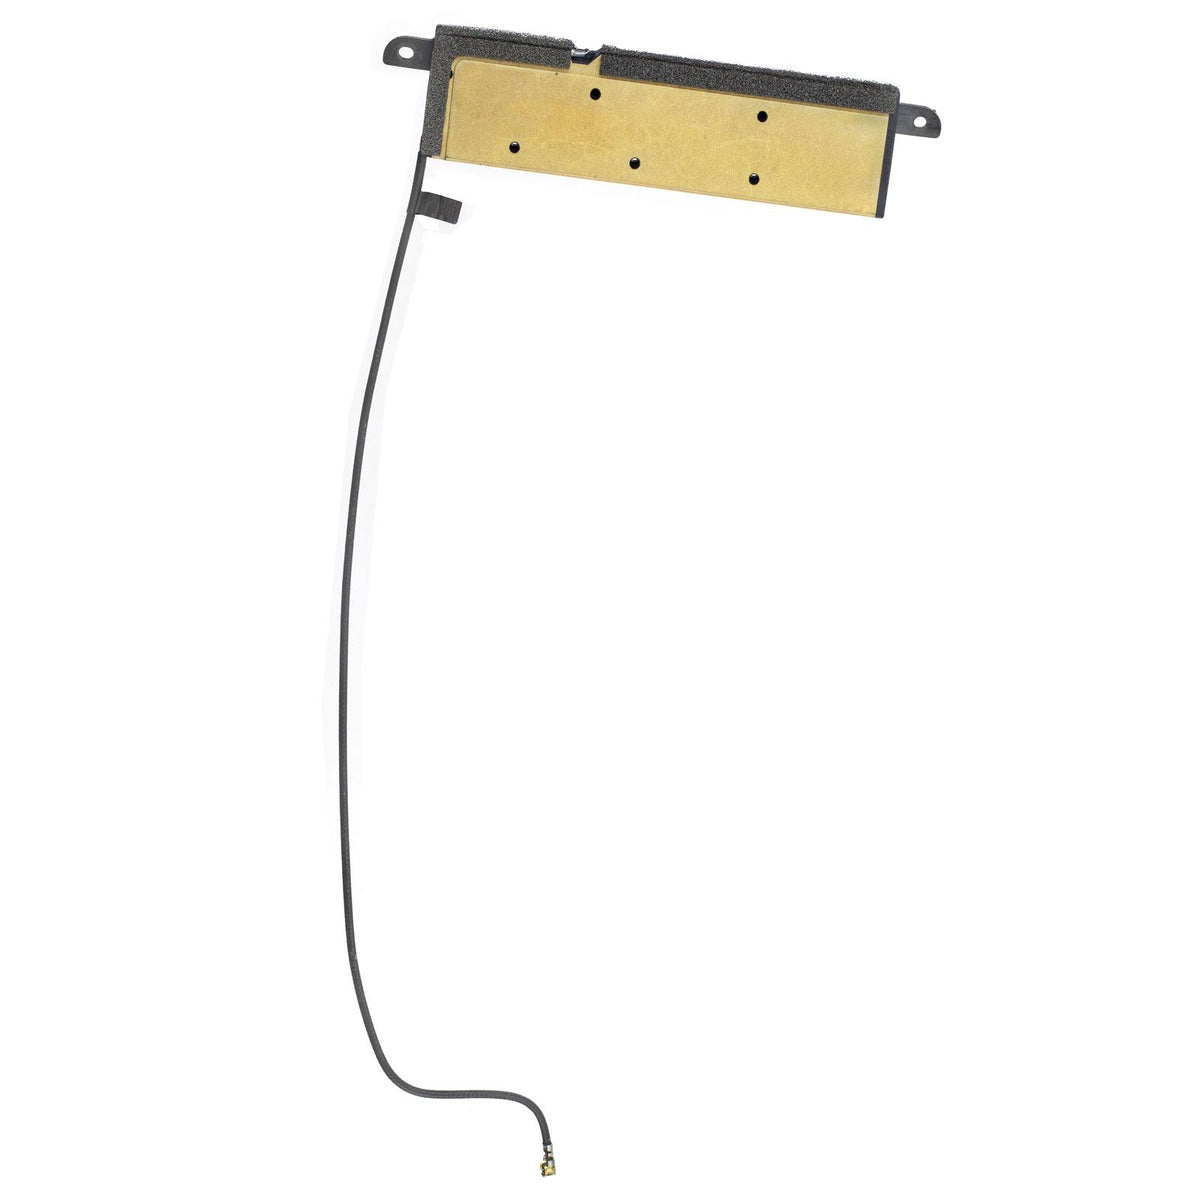 MID/LOWER WIFI ANTENNA FOR IMAC 27" A1419 (LATE 2012, MID 2015)